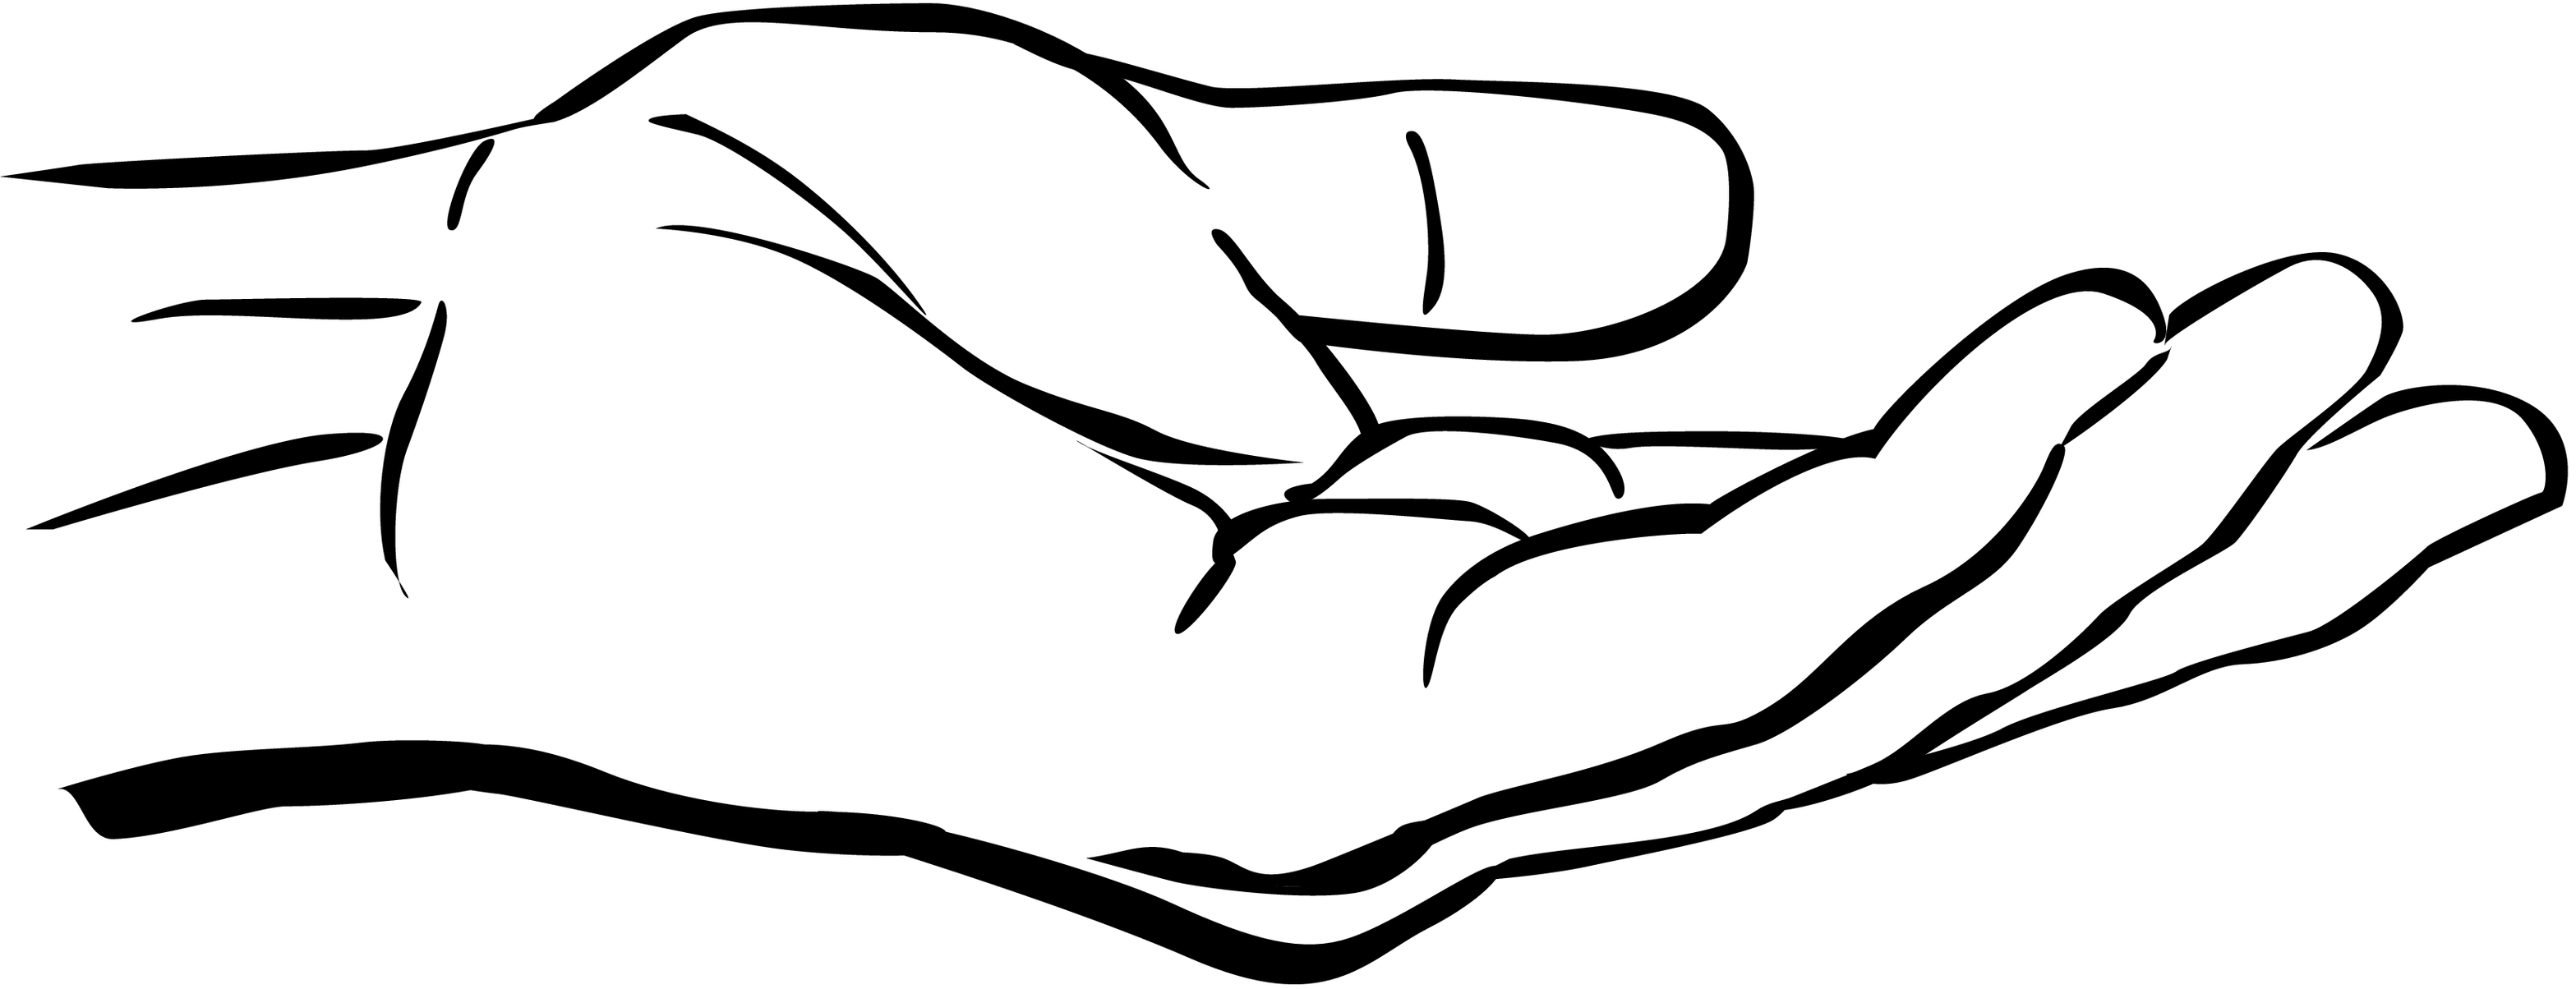 Helping Hands Clipart Black A